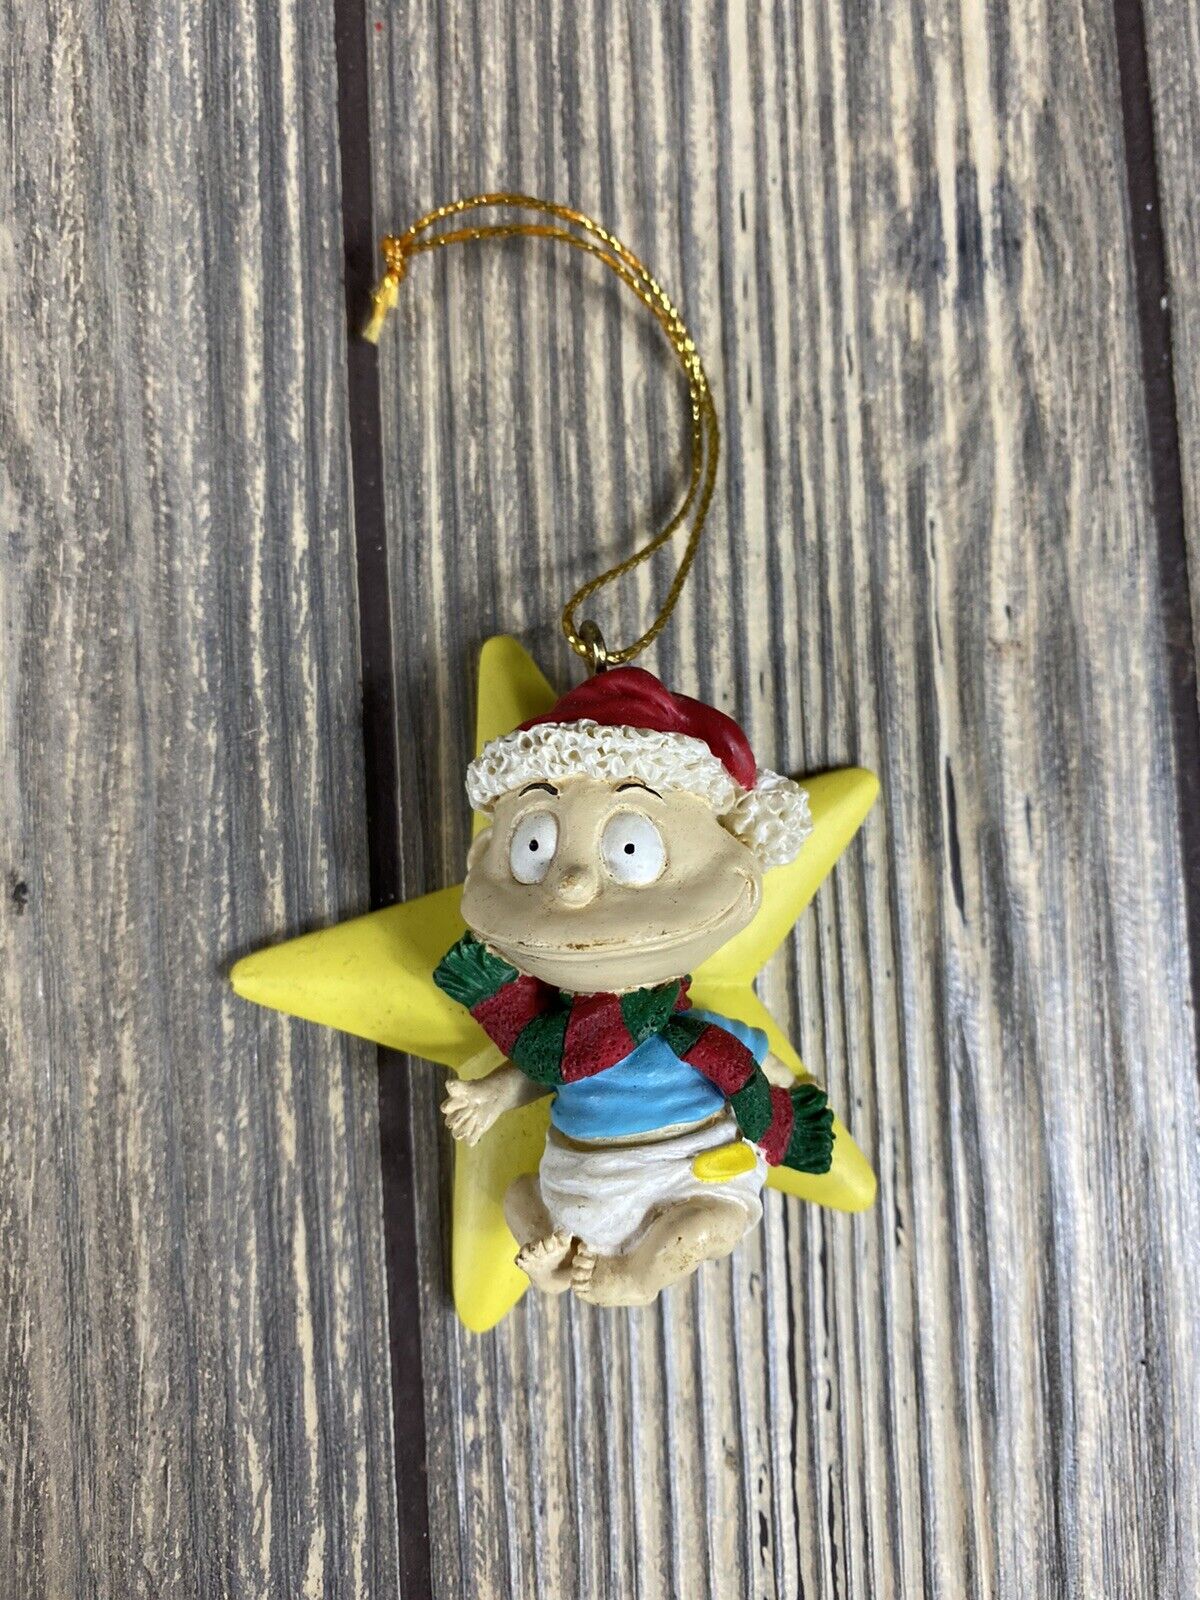 Vintage Viacom 1998 Rugrats Baby Tommy Star Nickelodeon Christmas Ornament